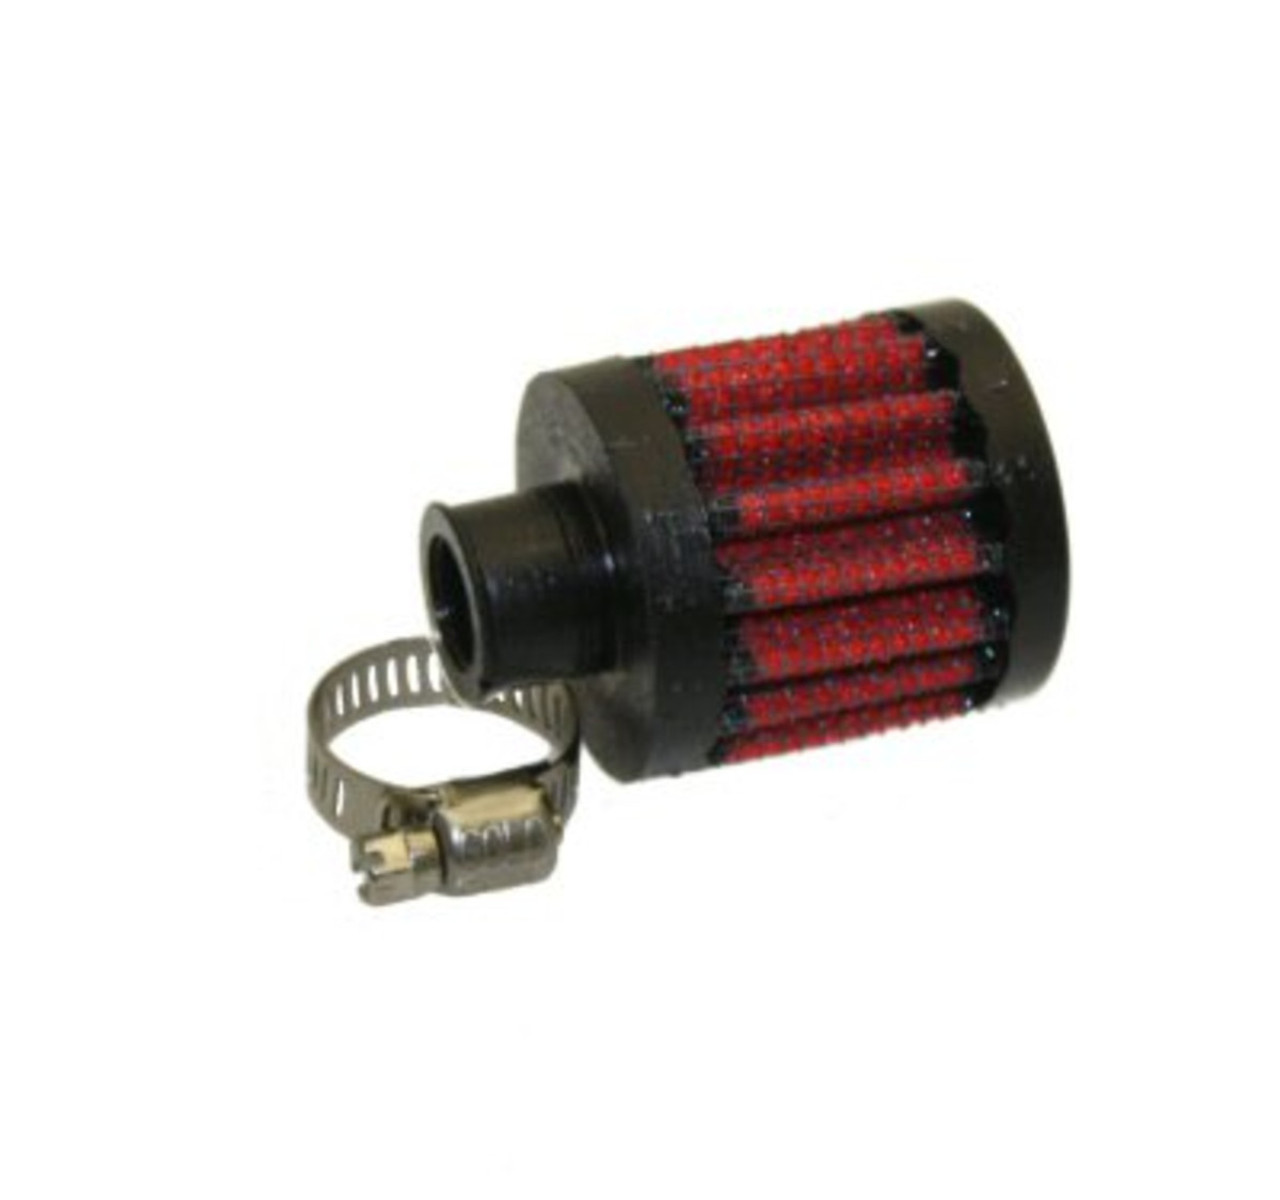 UNI FILTER "CLAMP-ON" BREATHERS FOR VENTING CRANKCASES SCOOTERS 3/8"